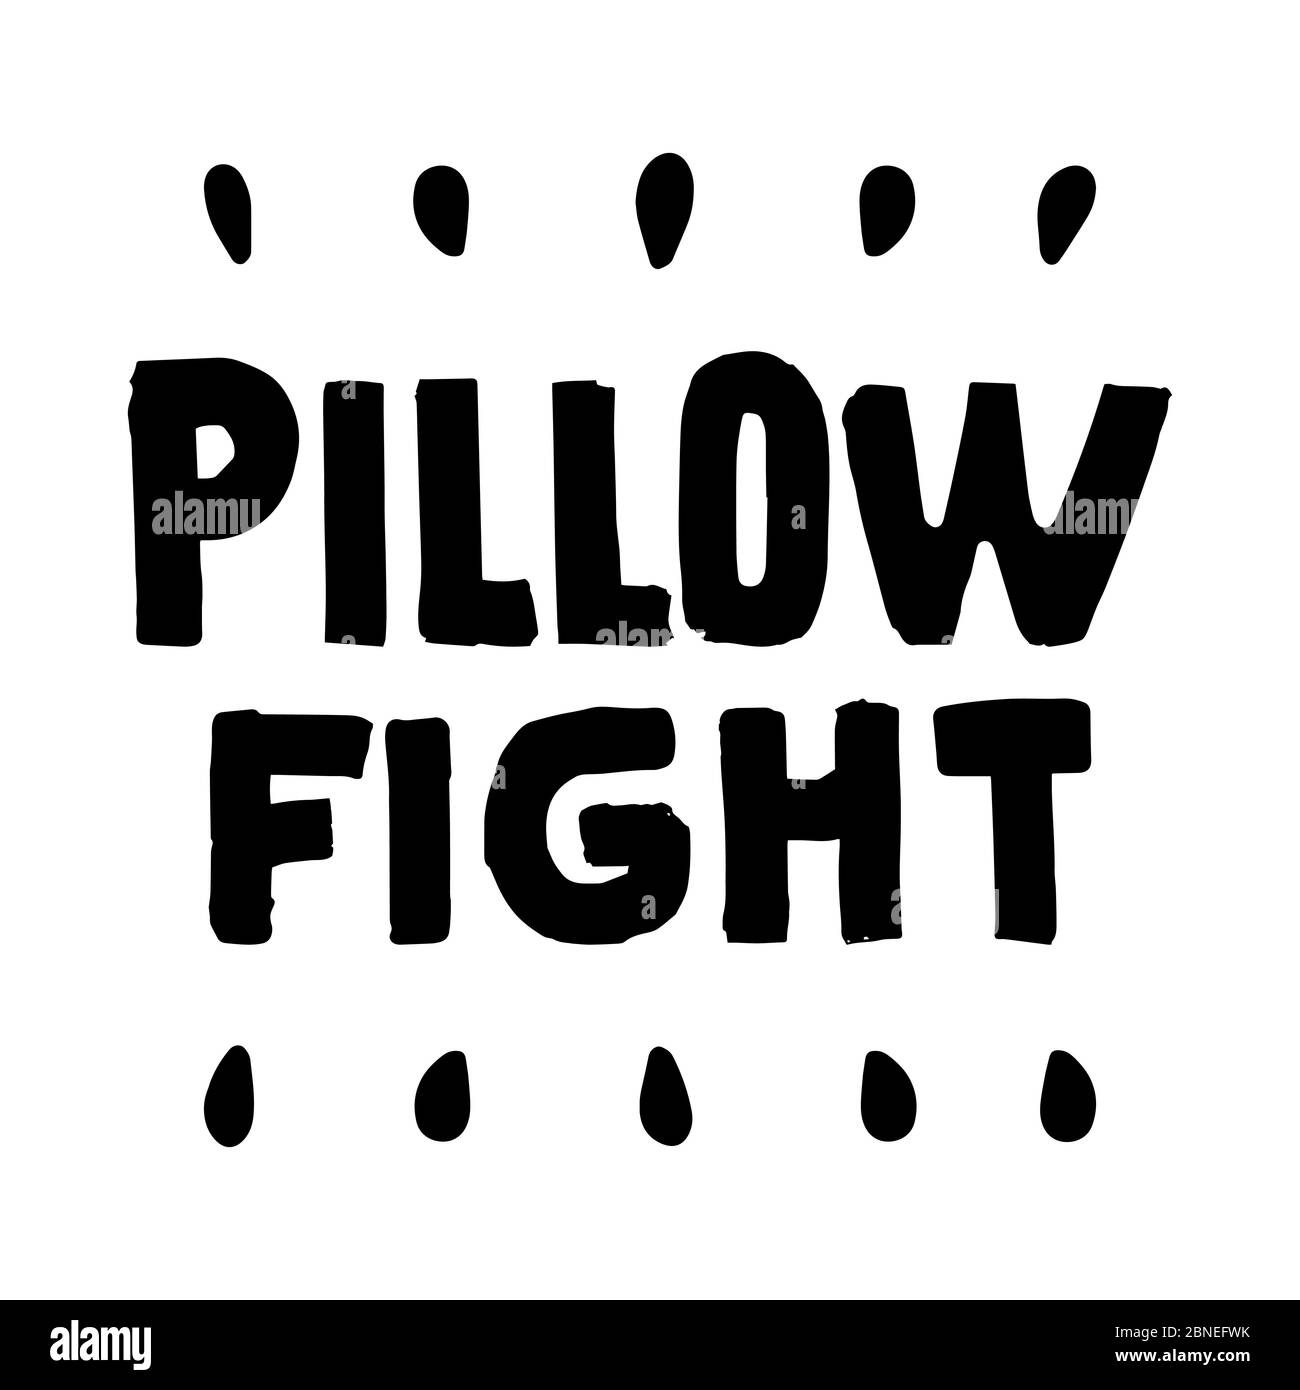 Pillow fight text isolated on white background. Vector outline lettering hand drawn illustration. Black and white print on t shirt, cup, pillow Stock Vector